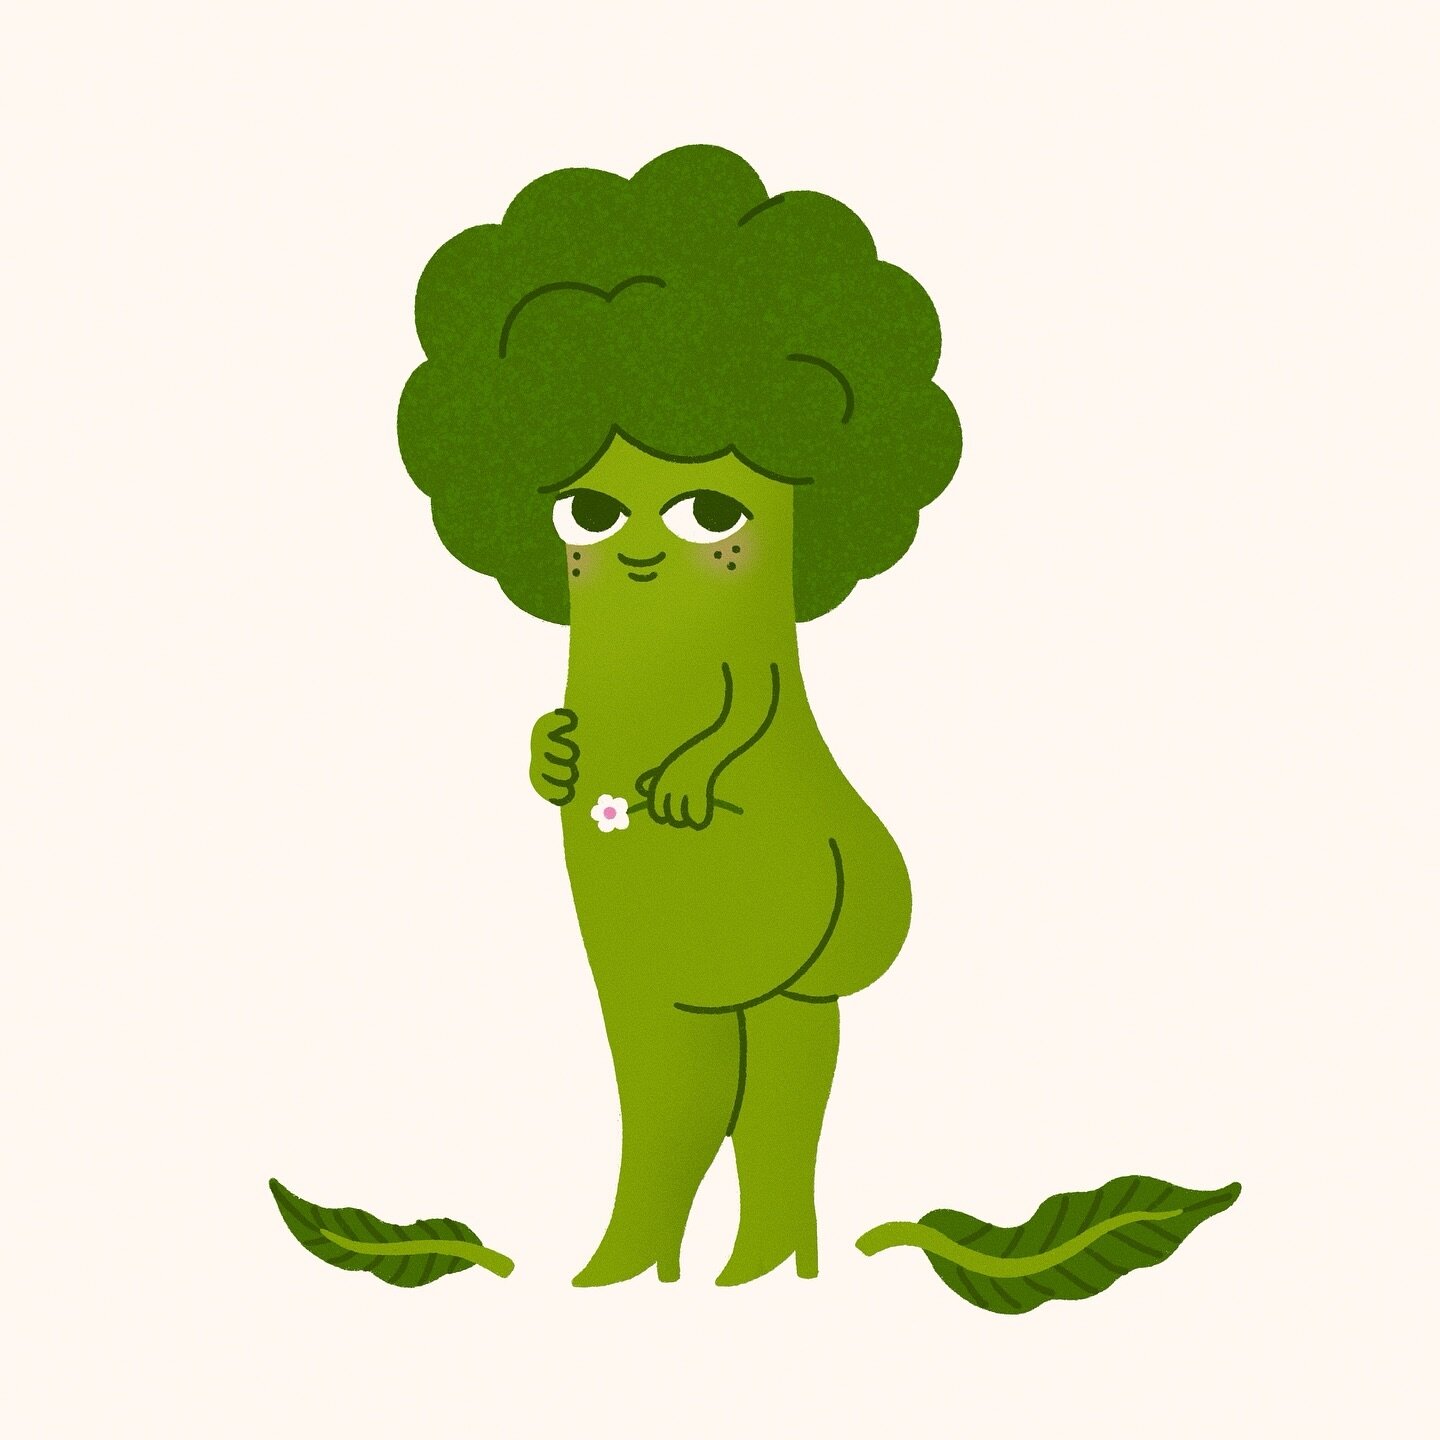 When your new year's resolution is to eat more veggies 😏👅🥦

#eatmoreveggies #newyearsresolution #cheeky #broccoli #caitlindasdesign #illustration